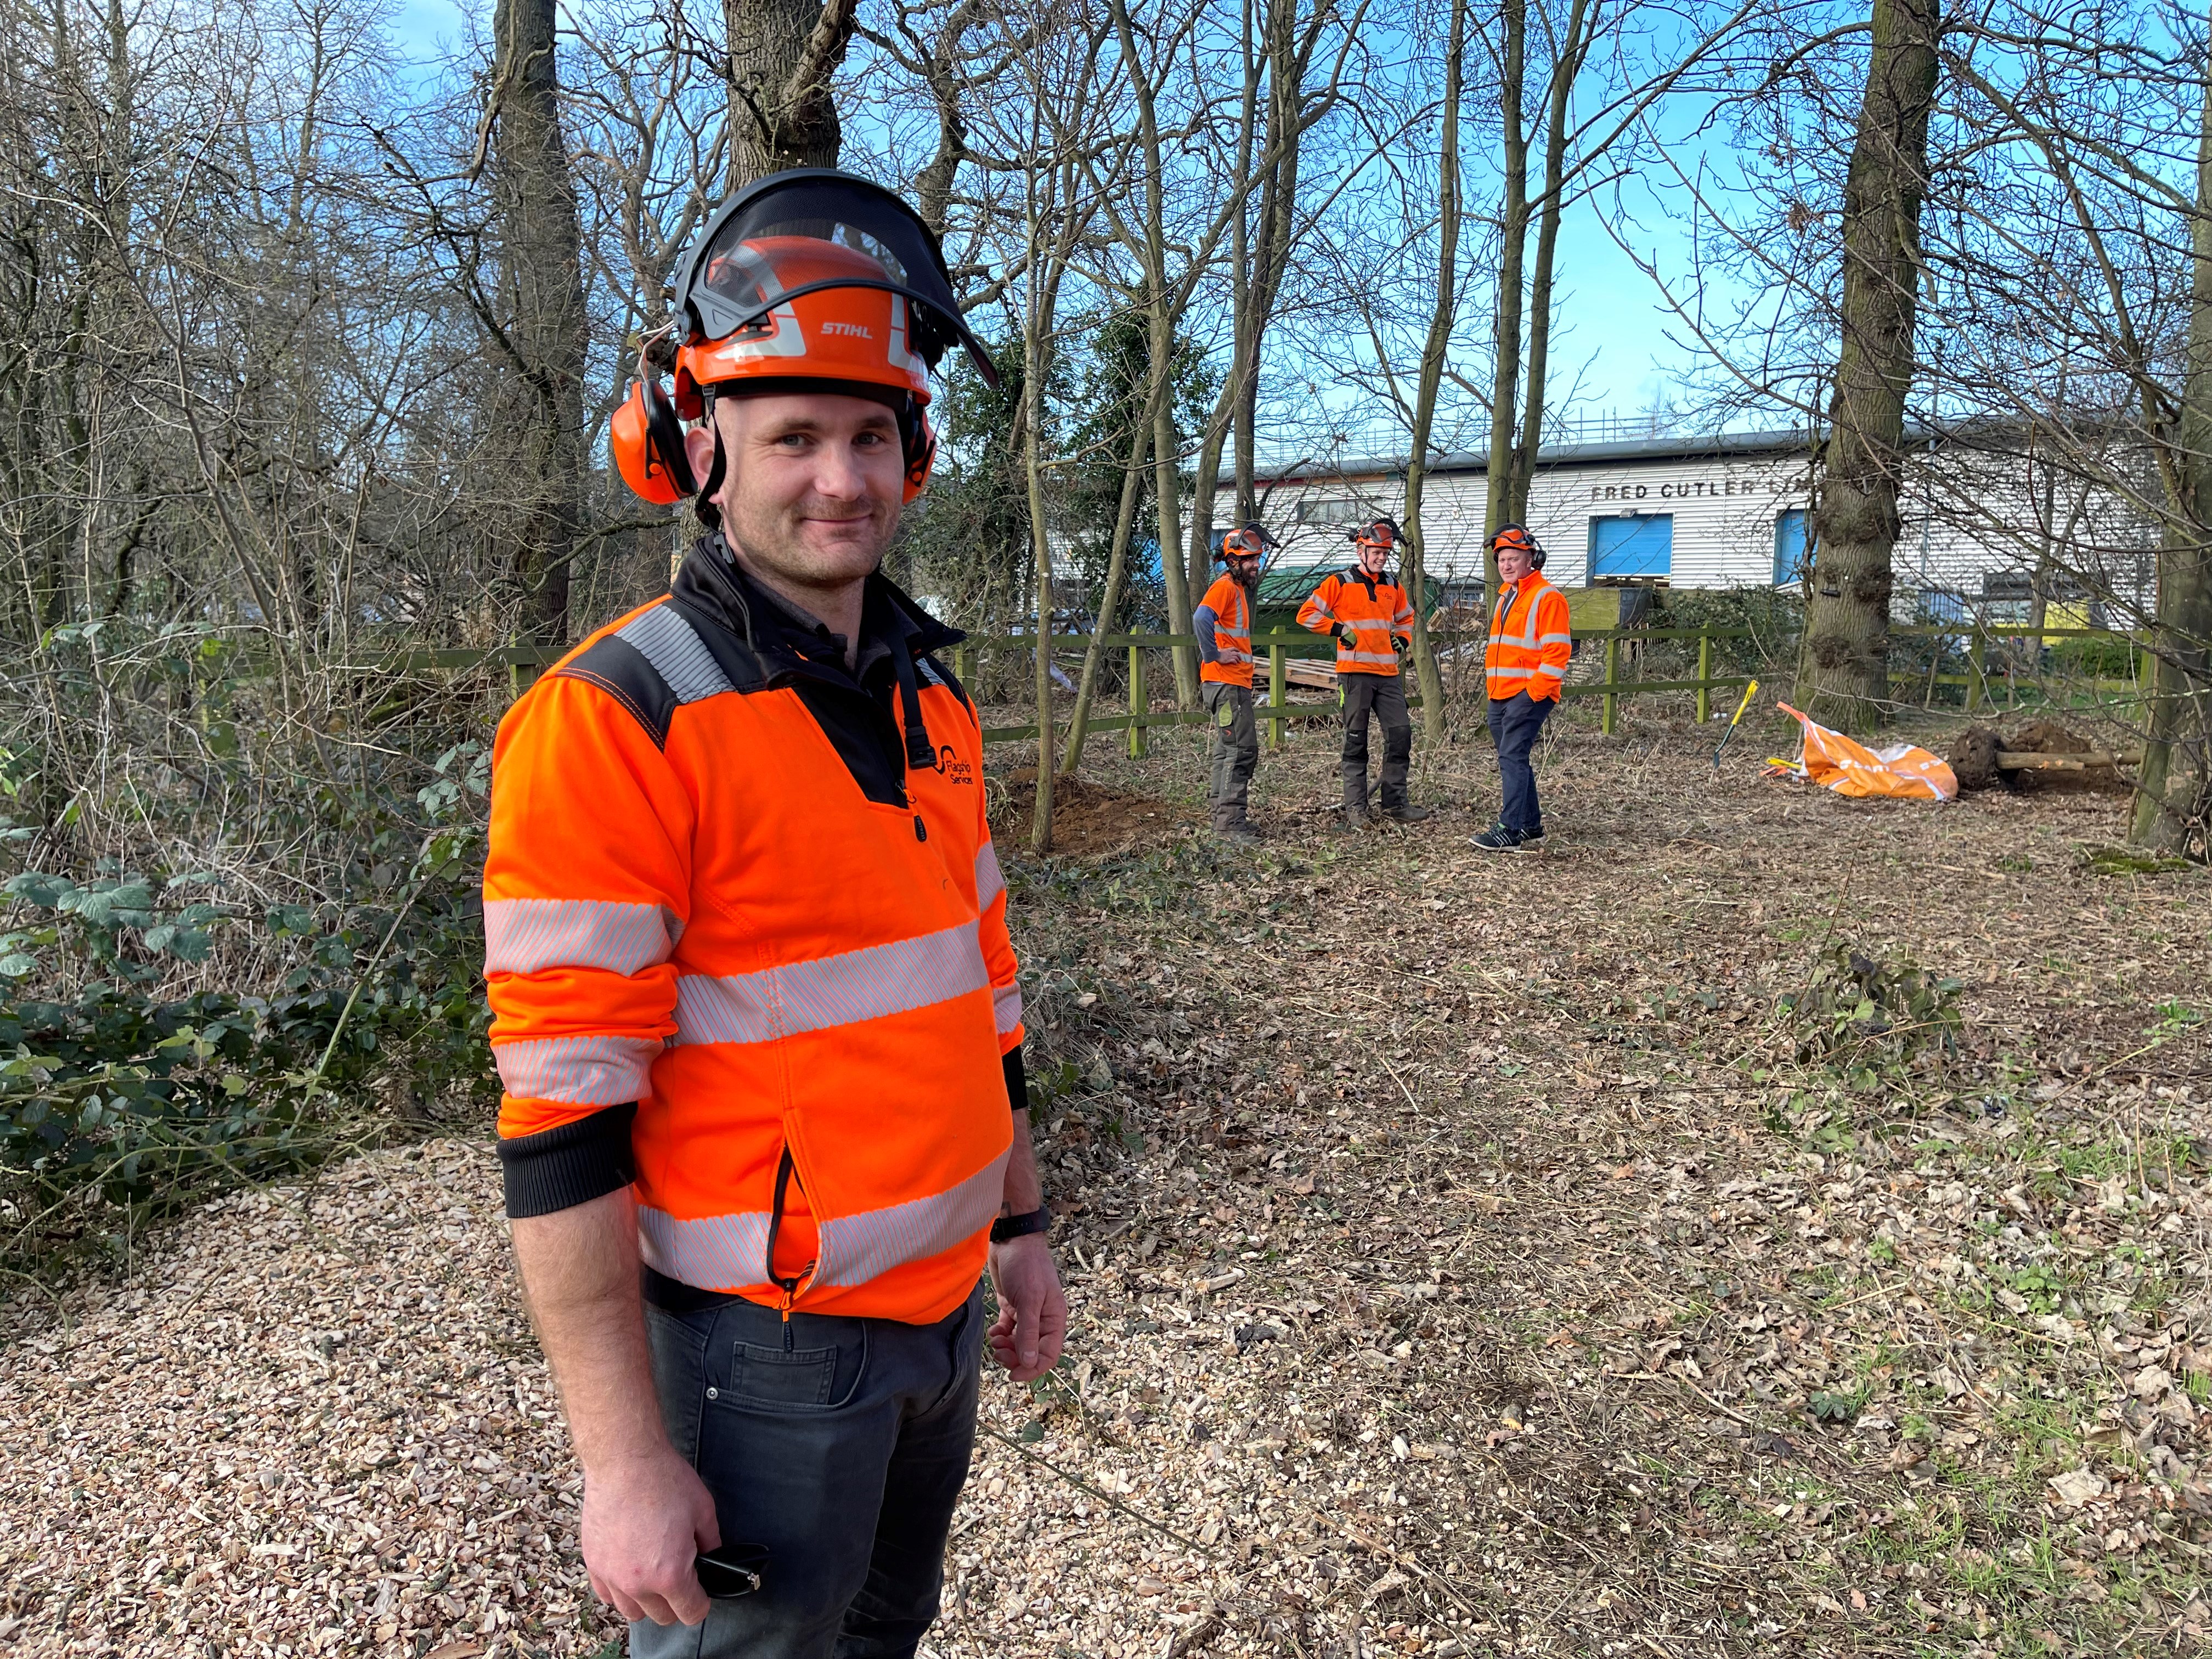 Flagship Services arboriculture services manager Dan Curtis at the site of the tree planting at Greens Wood, Bury St Edmunds